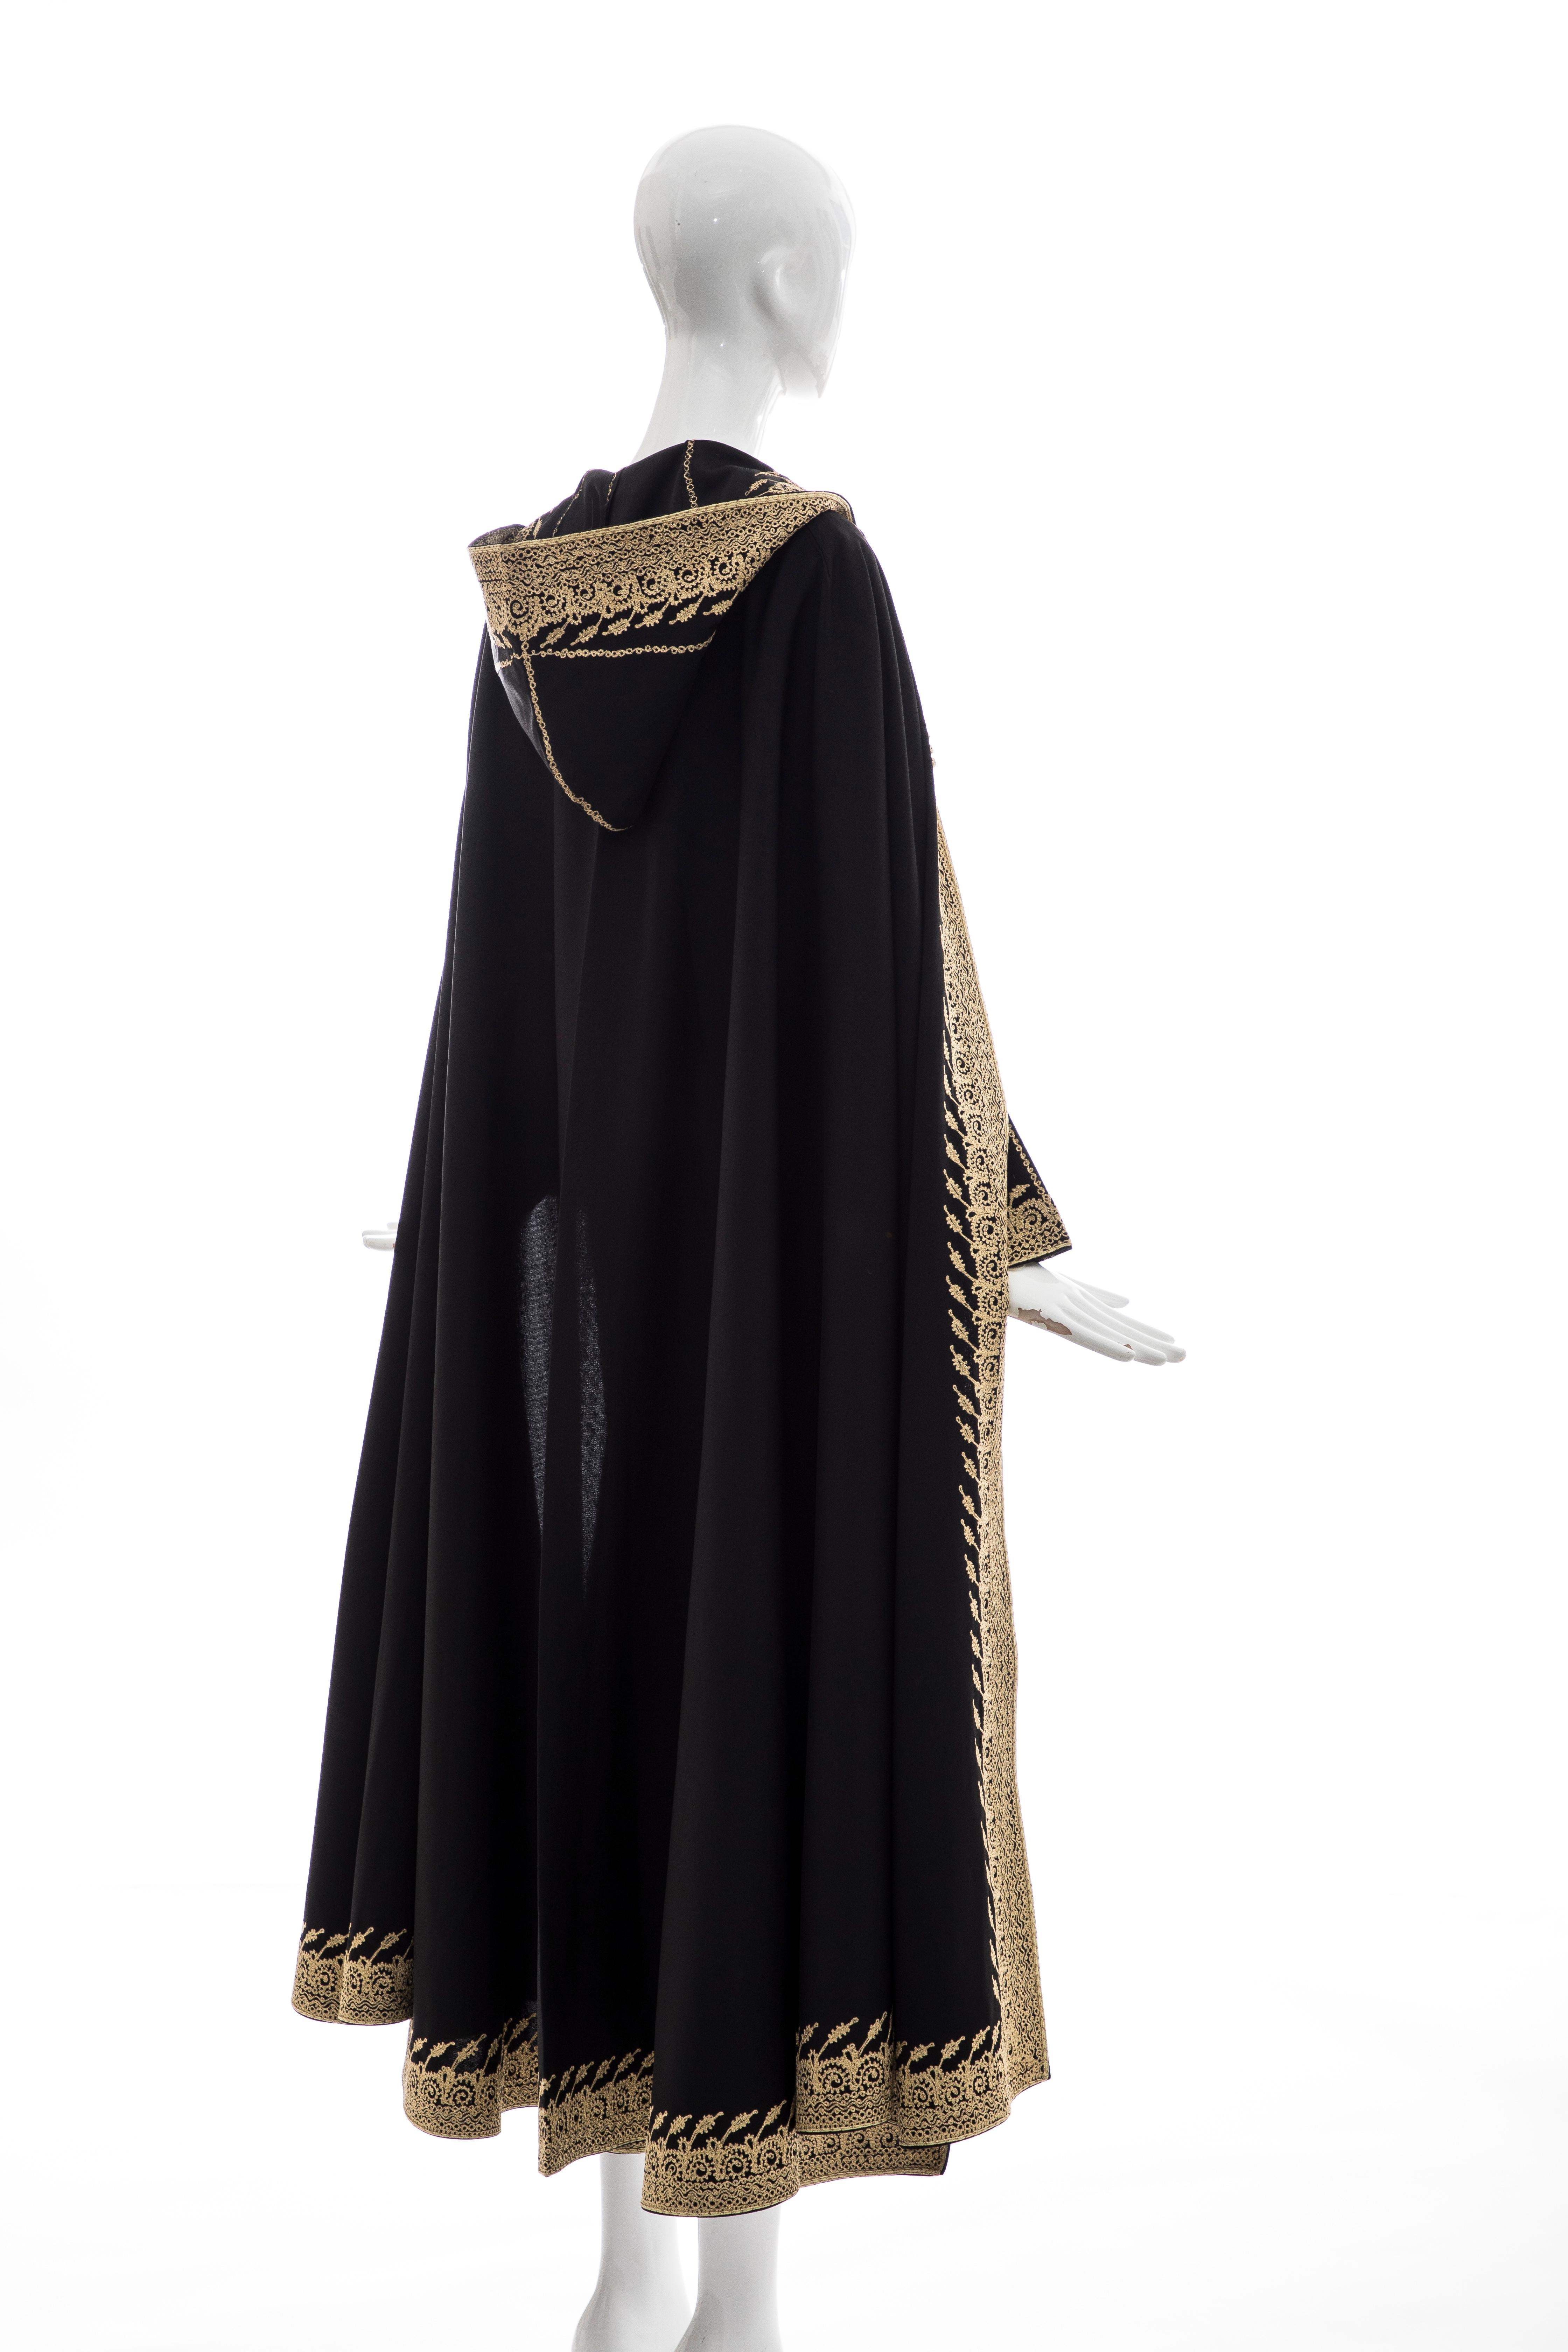 Moroccan Black Kaftan With Gold Embroidery Separate Hooded Cape, Circa 1970's 5